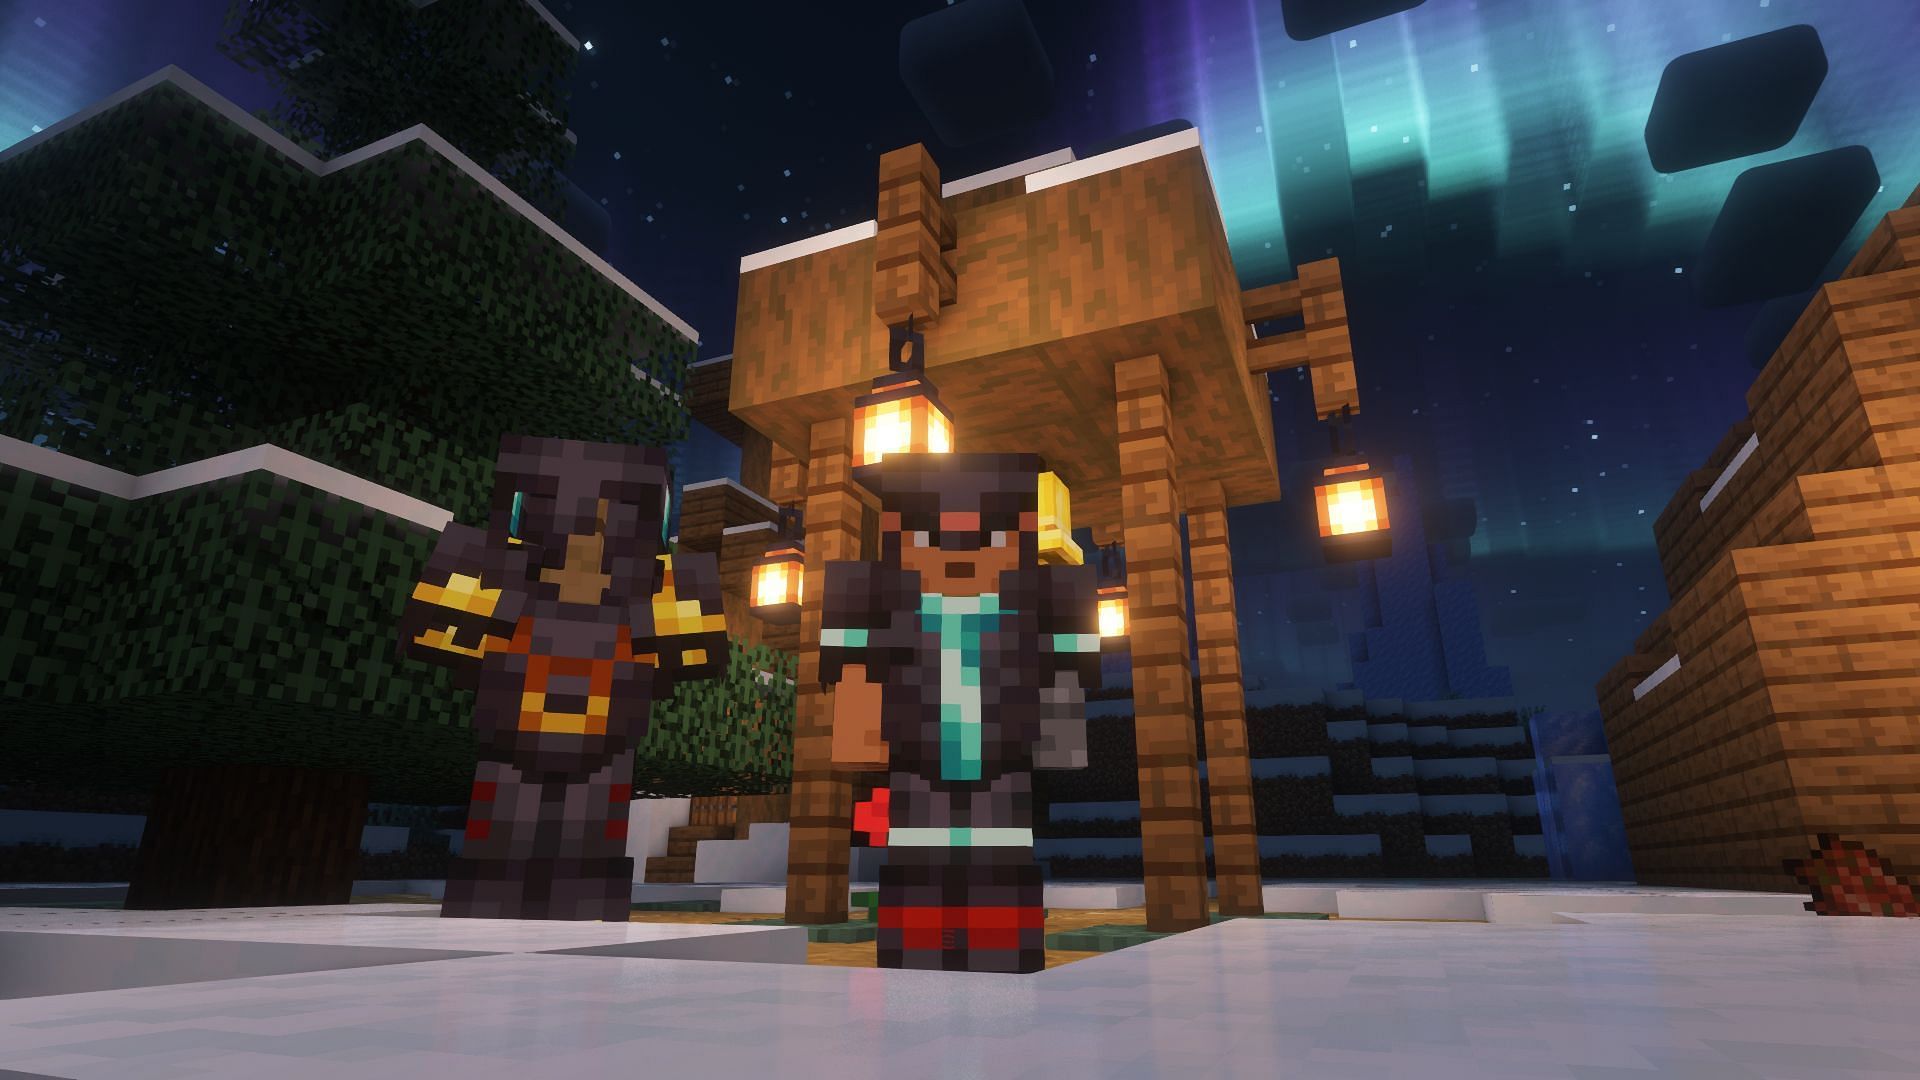 Player equipped with a unique netherite armor (Image via Mojang)